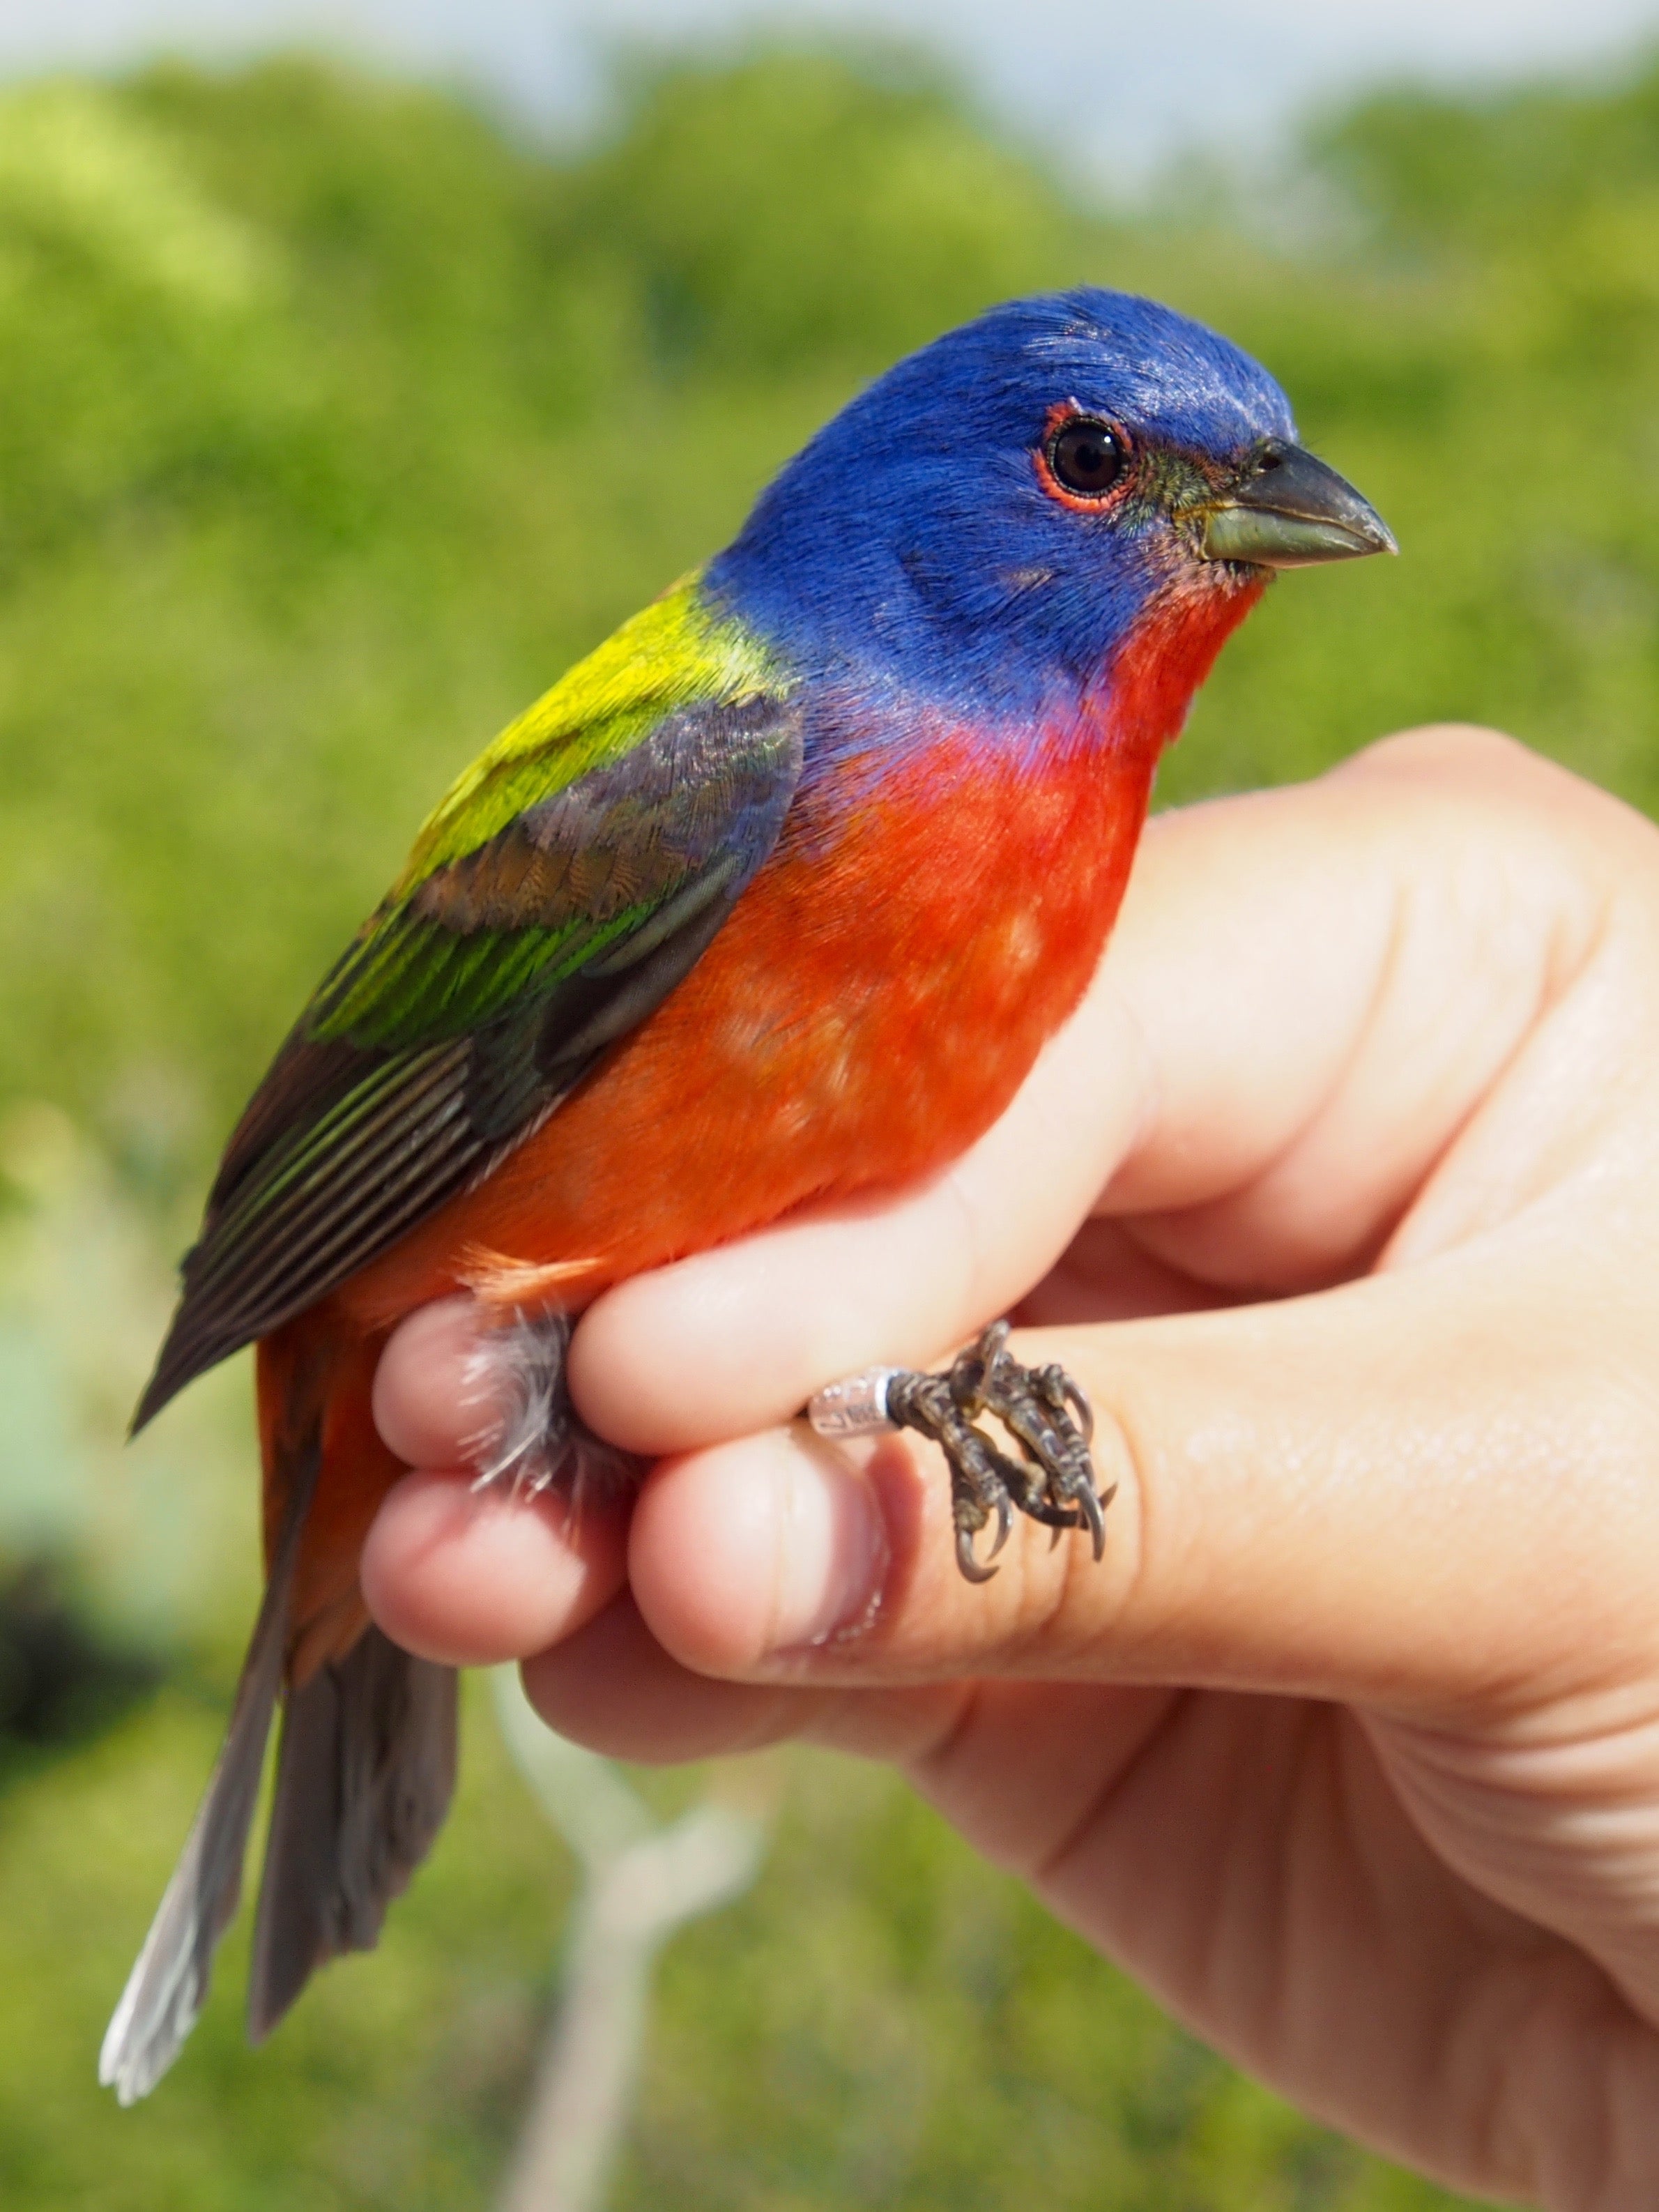 A painted bunting